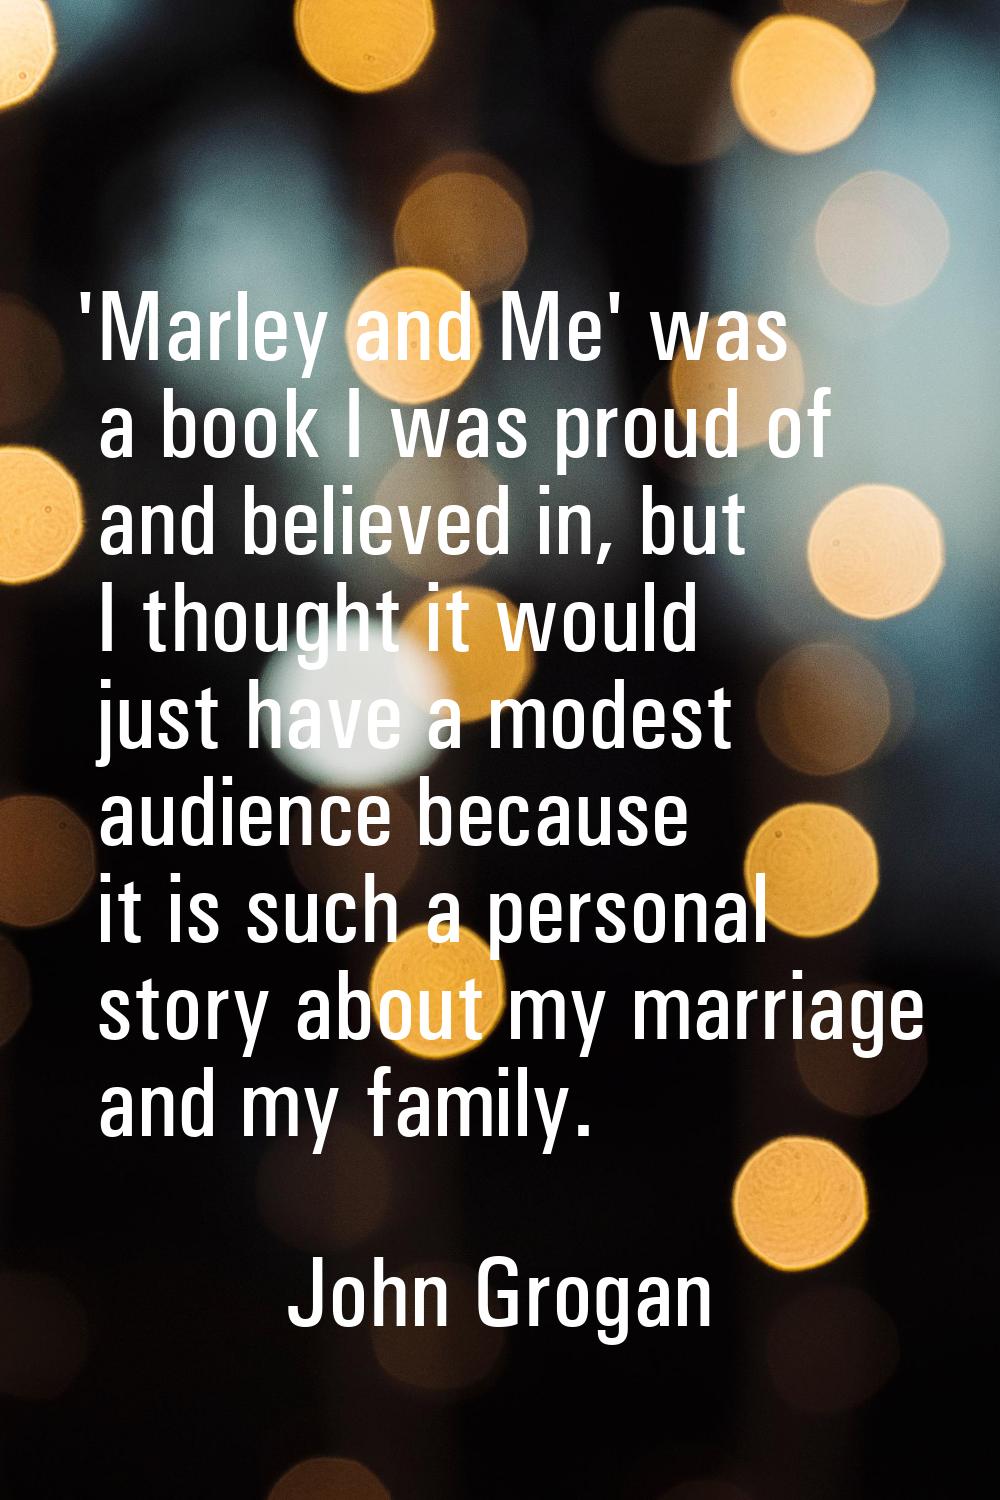 'Marley and Me' was a book I was proud of and believed in, but I thought it would just have a modes